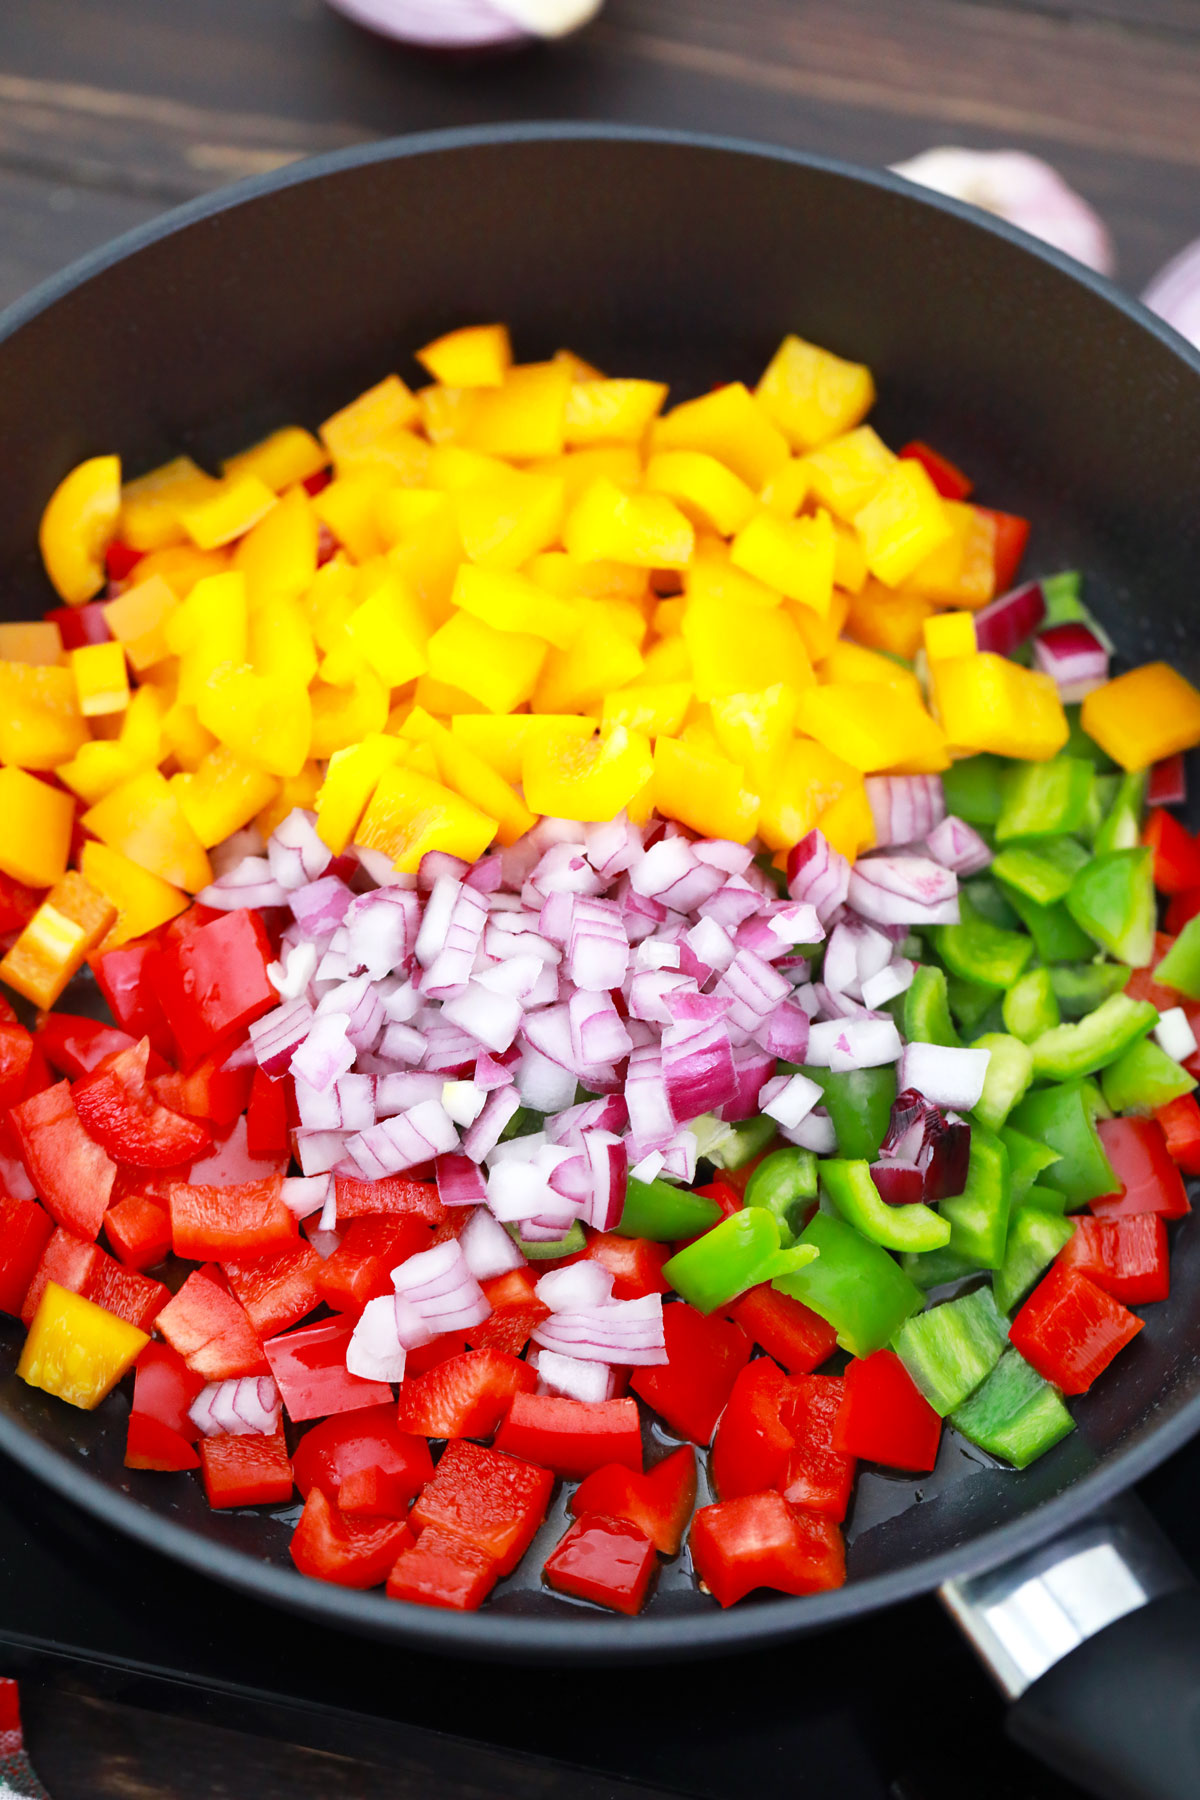 Colorful diced peppers and onions in skillet, starting to cook.